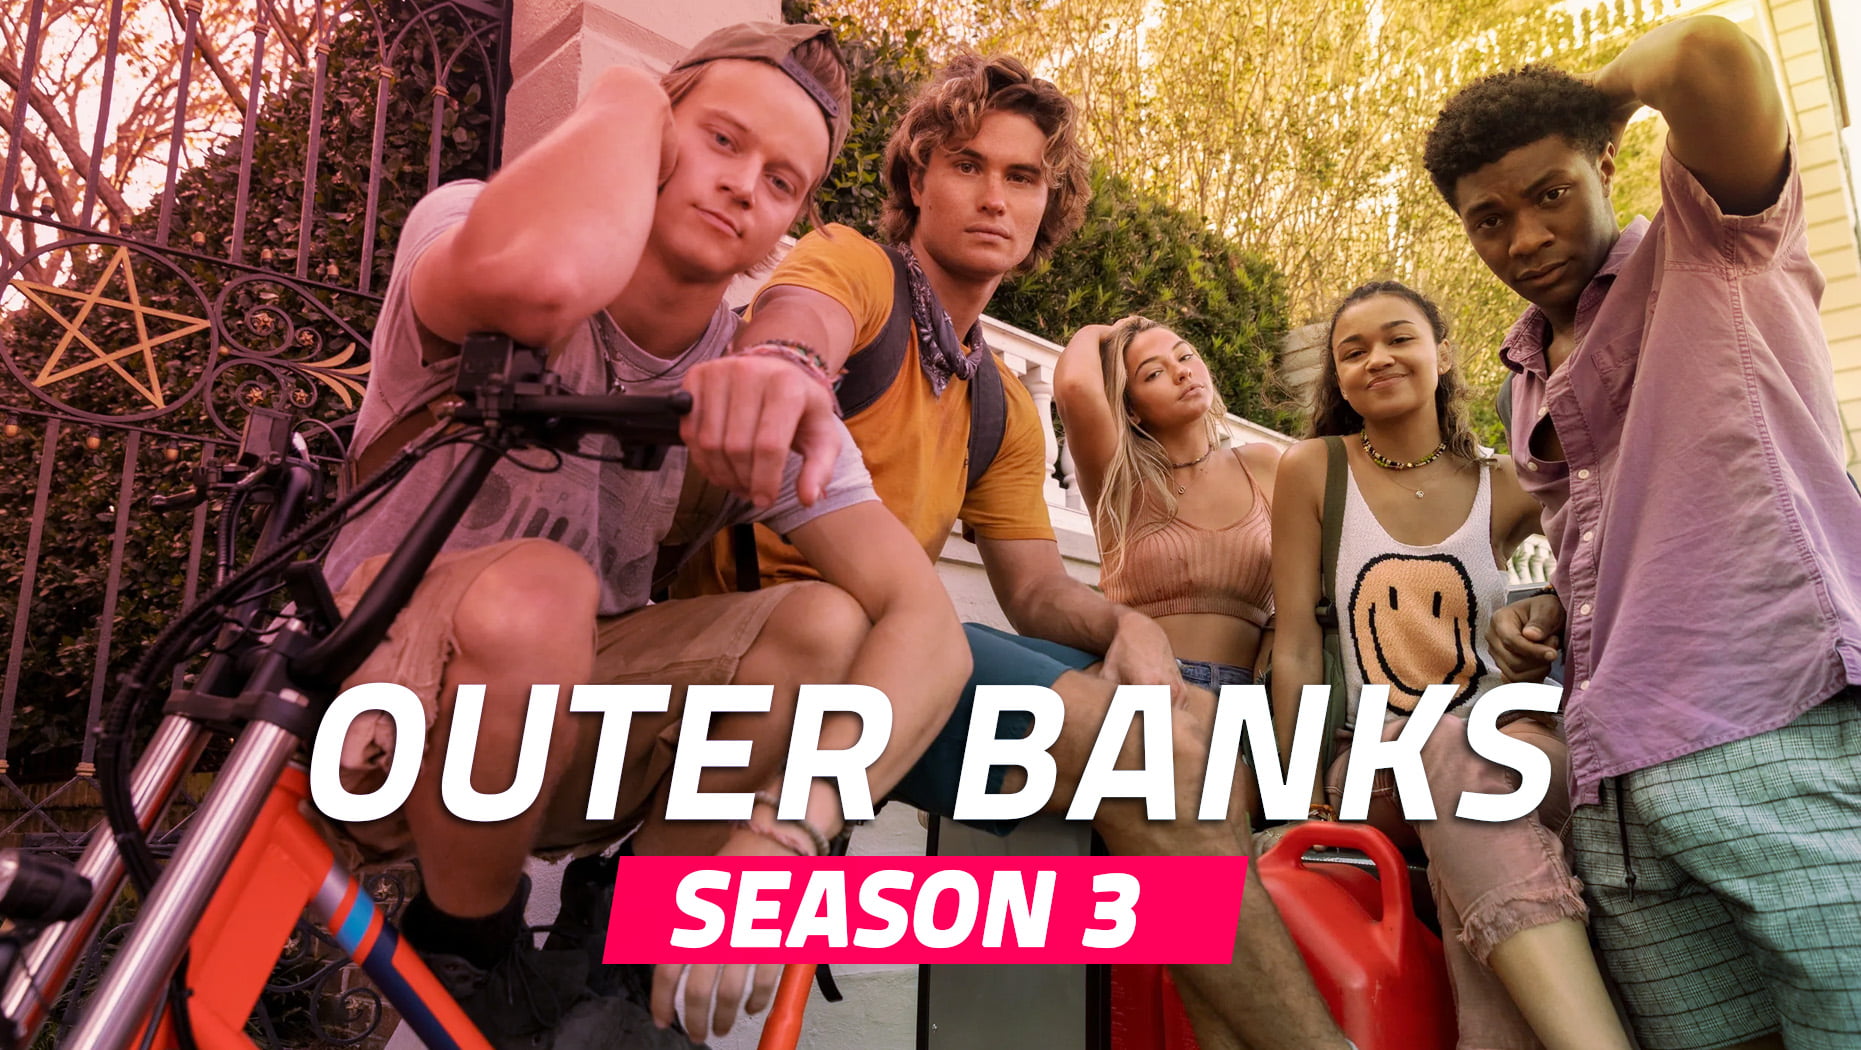 Outer banks season 3 release date